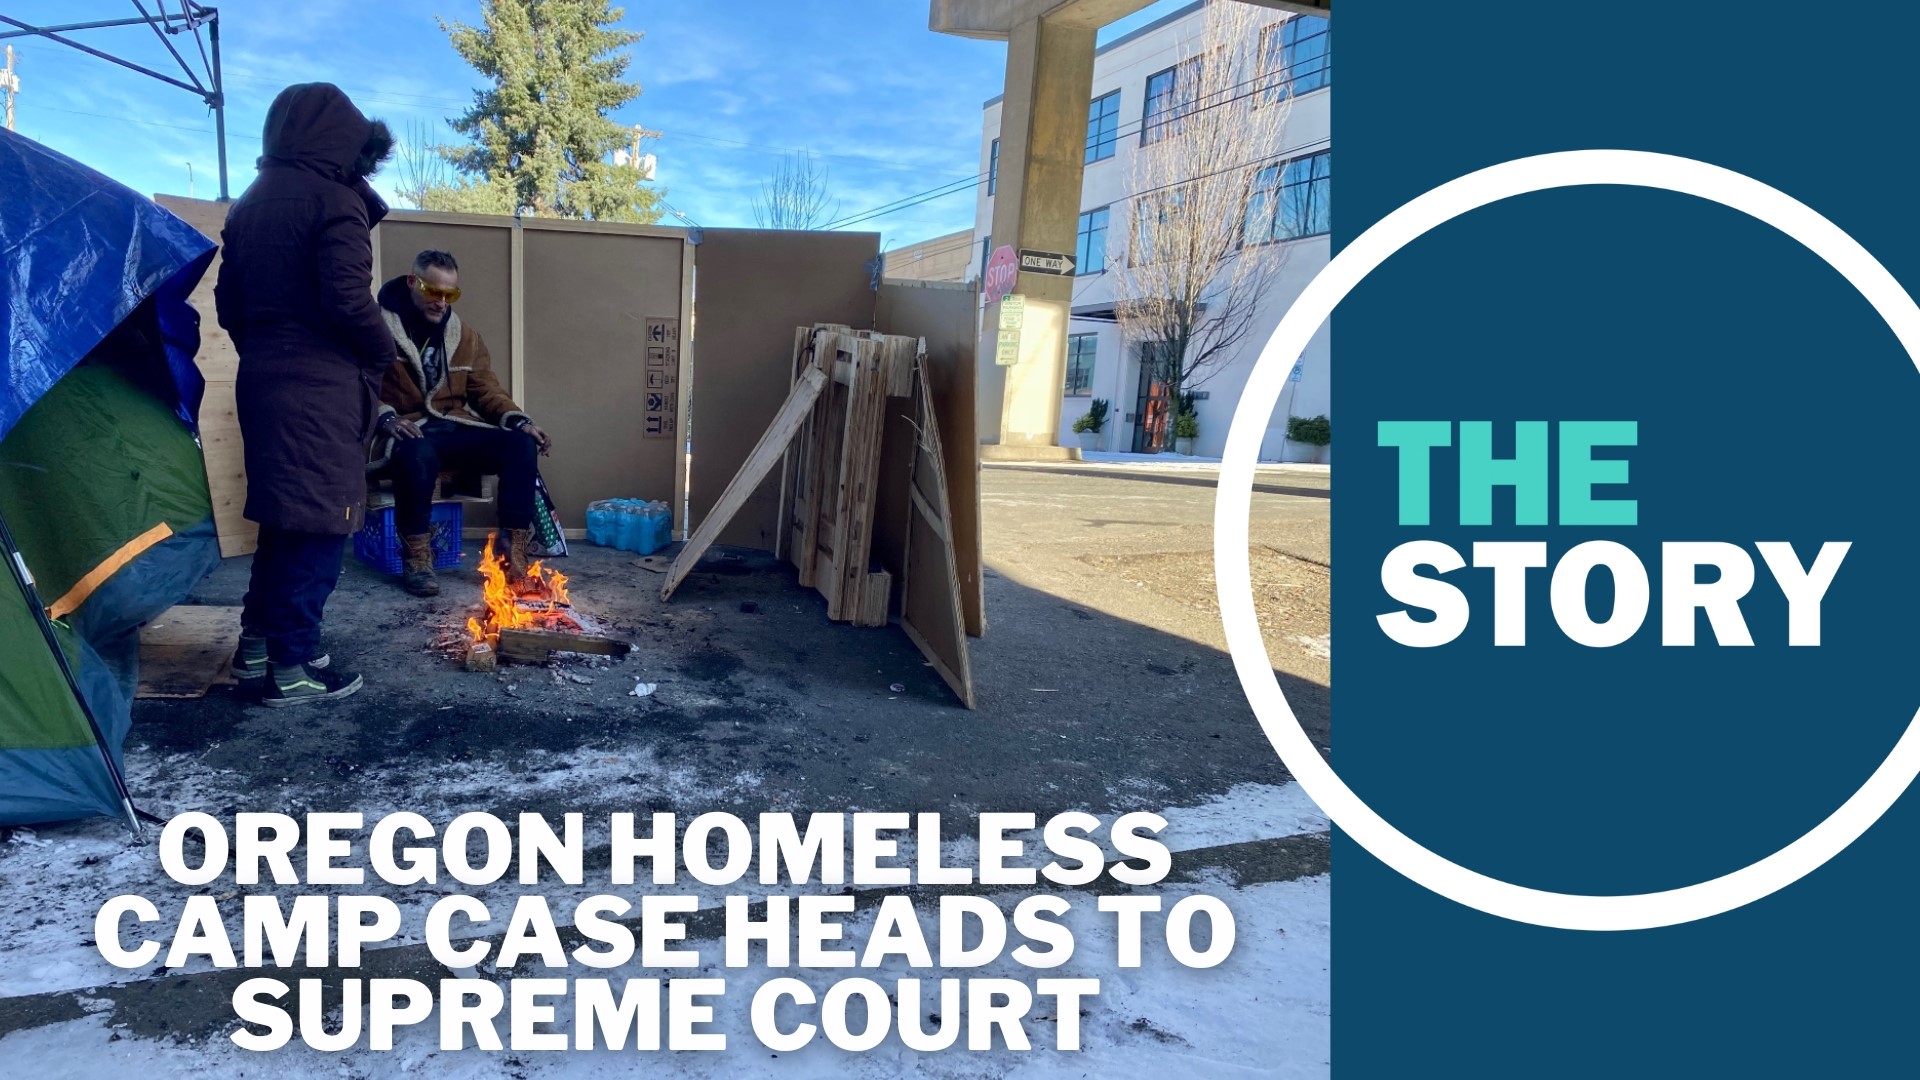 An appeals court decision against the southern Oregon city of Grants Pass shielded homeless people from "cruel and unusual" penalties. That could soon change.